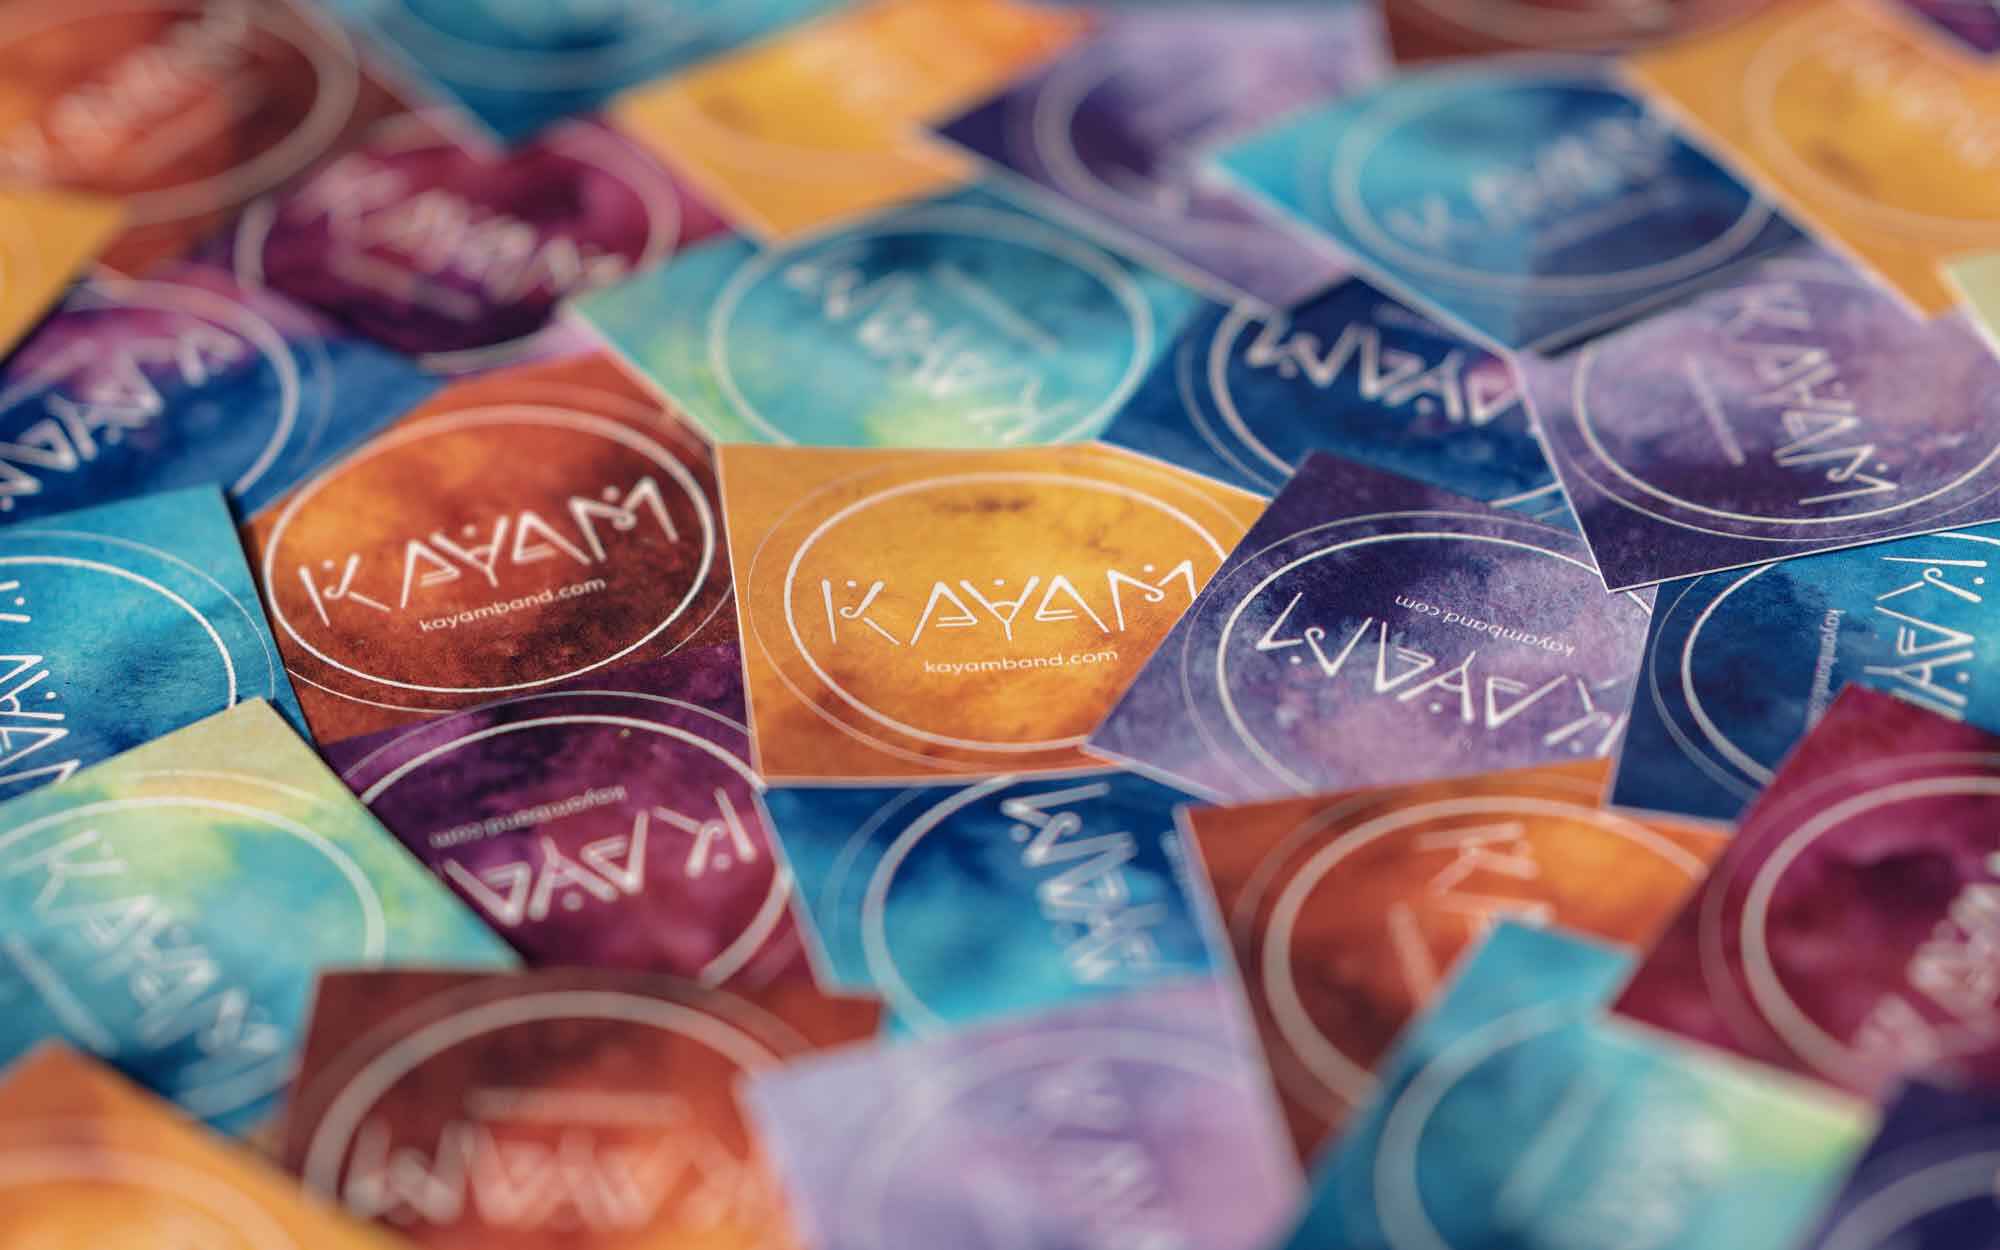 KAYAM merch: A pile of multi-coloured stickers